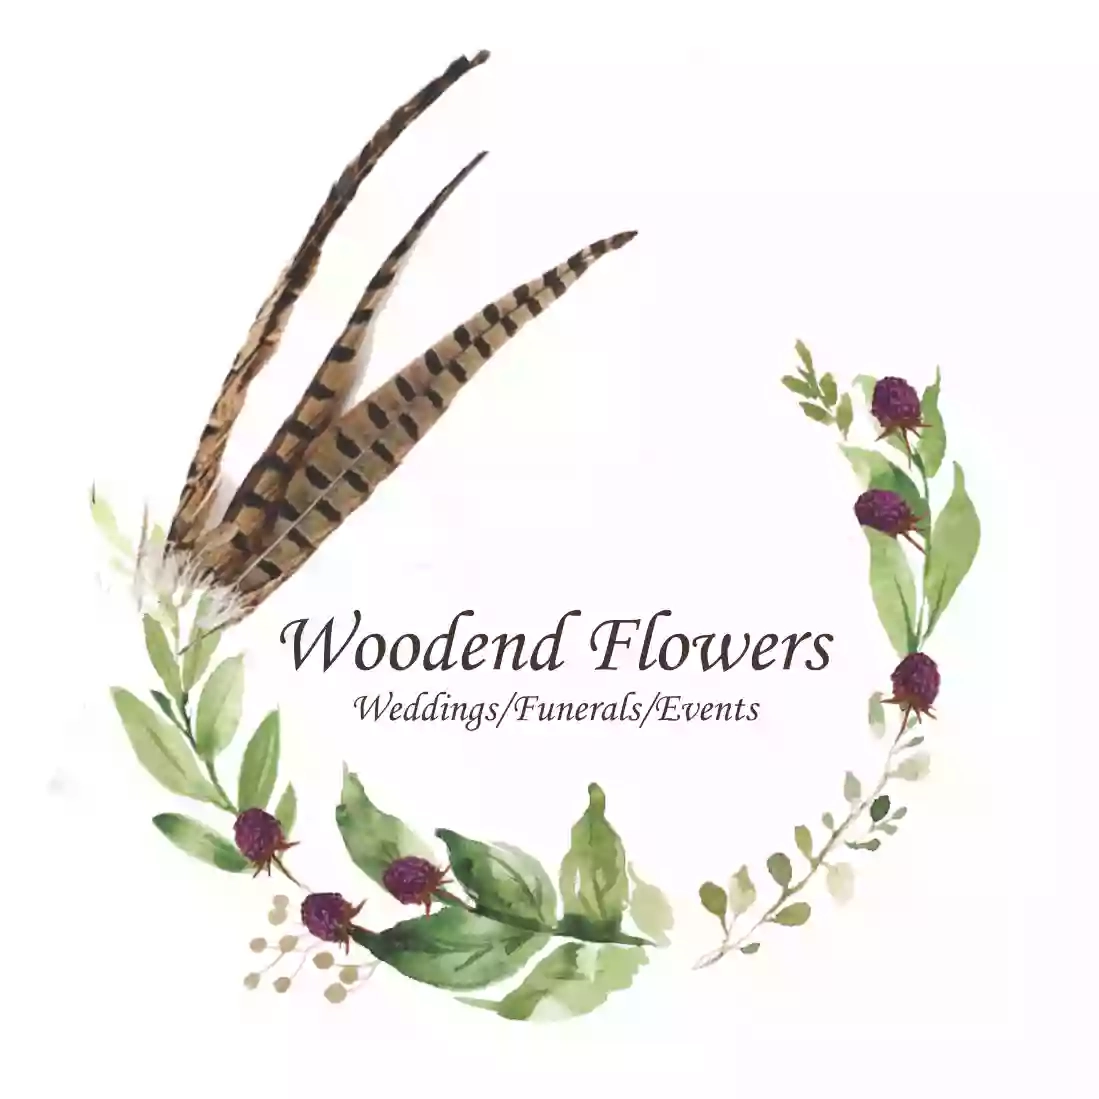 Woodend Flowers